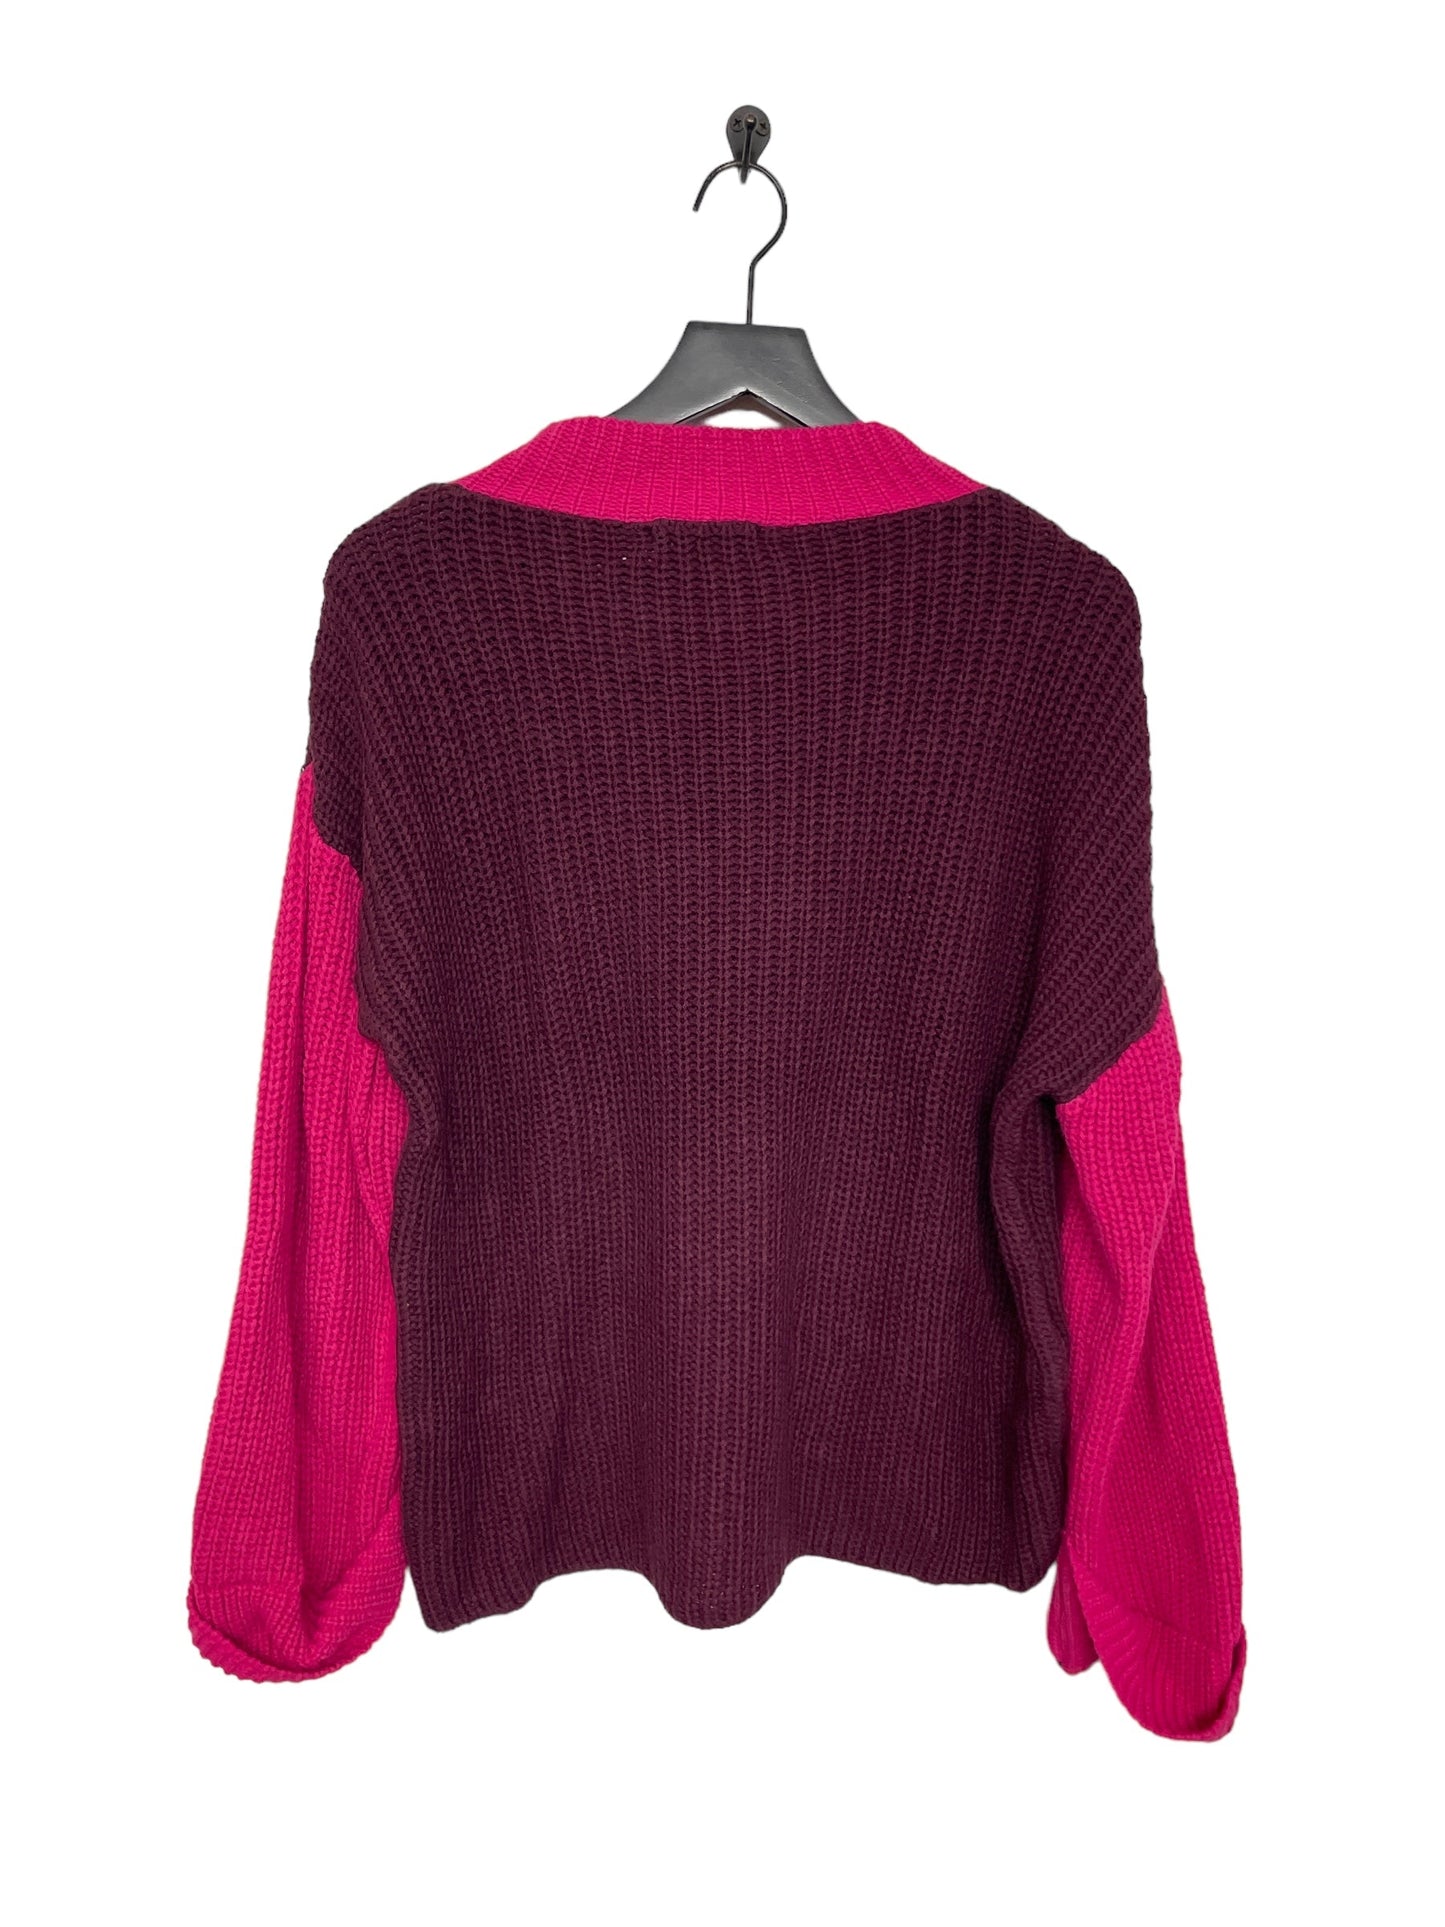 Plum Sweater Clothes Mentor, Size S